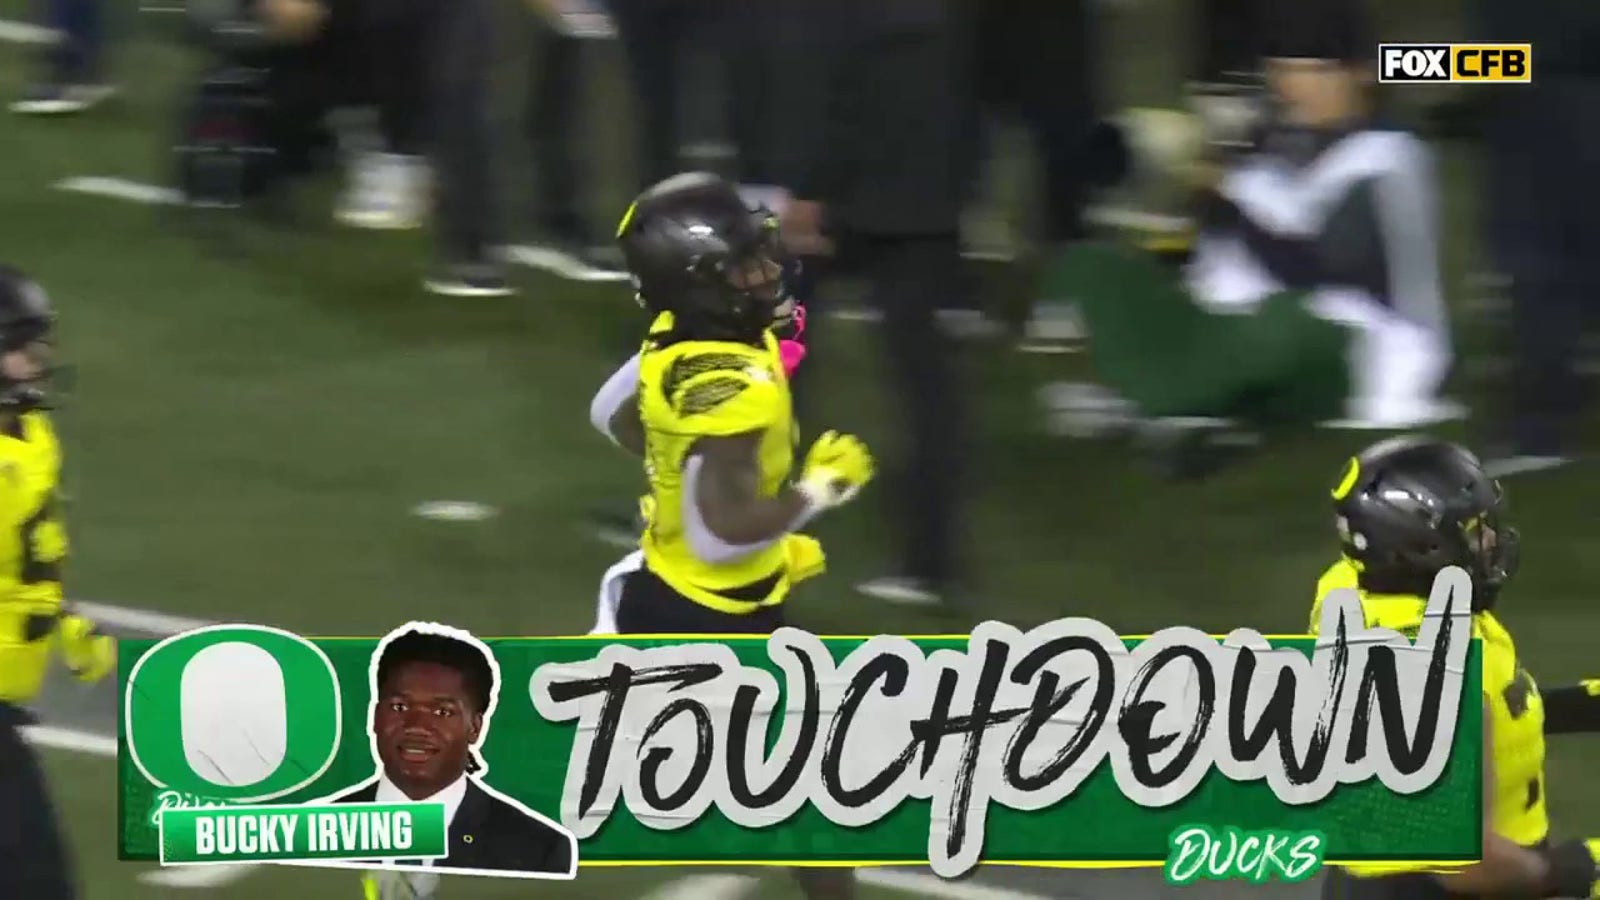 Bucky Irving rushes for a TOUGH 19-yard TD to extend Oregon's lead.